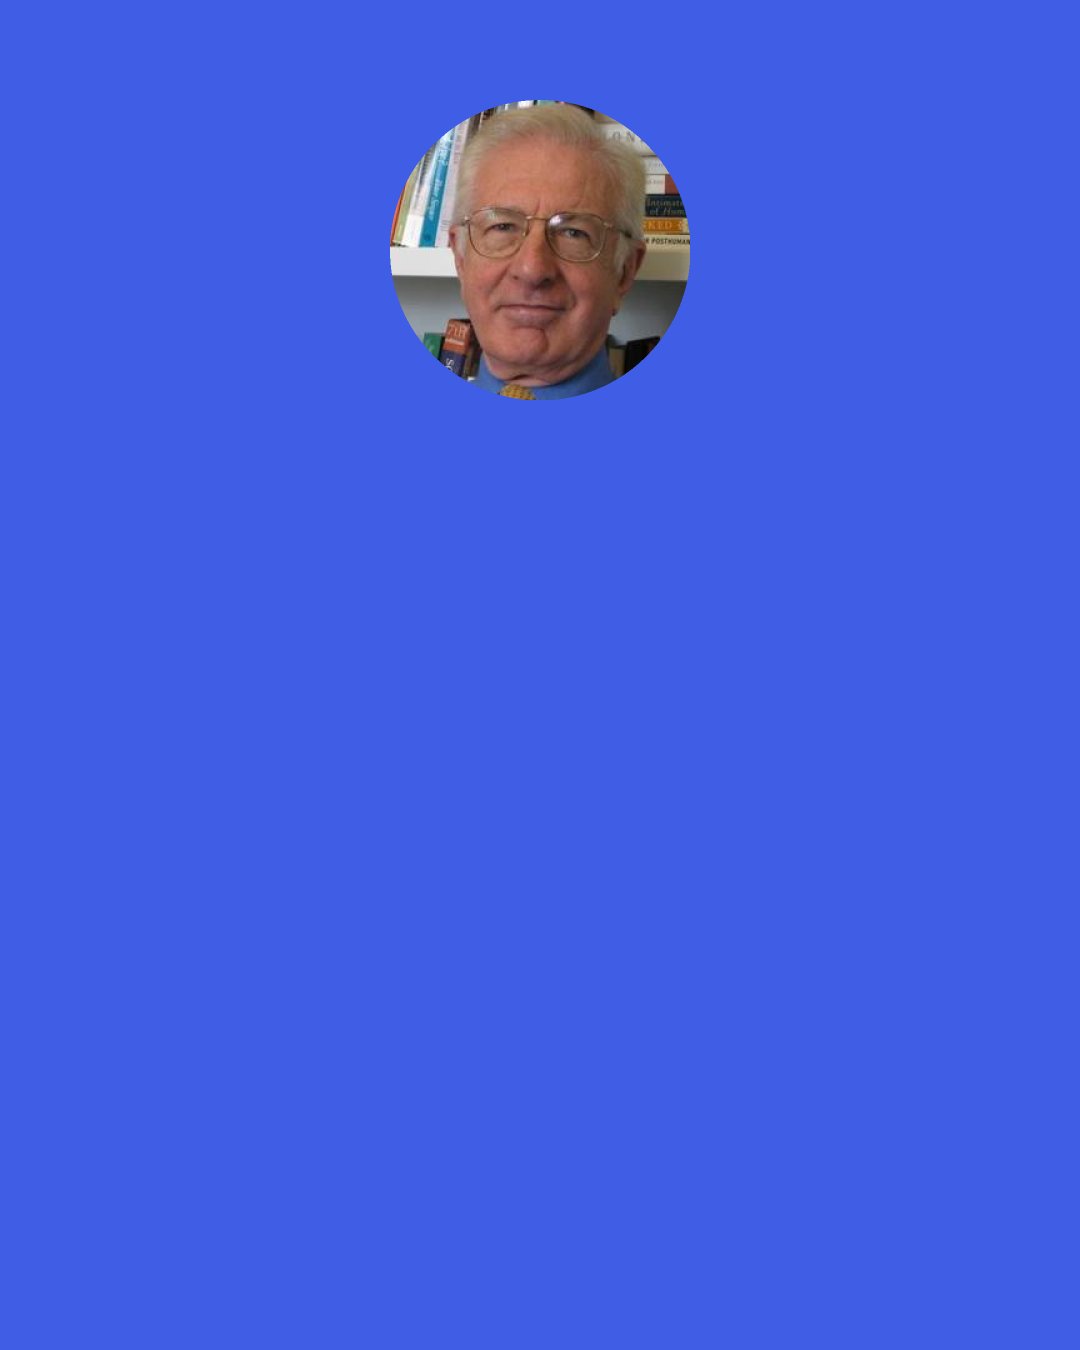 Richard Layard, Baron Layard: Competition for status is a zero sum game